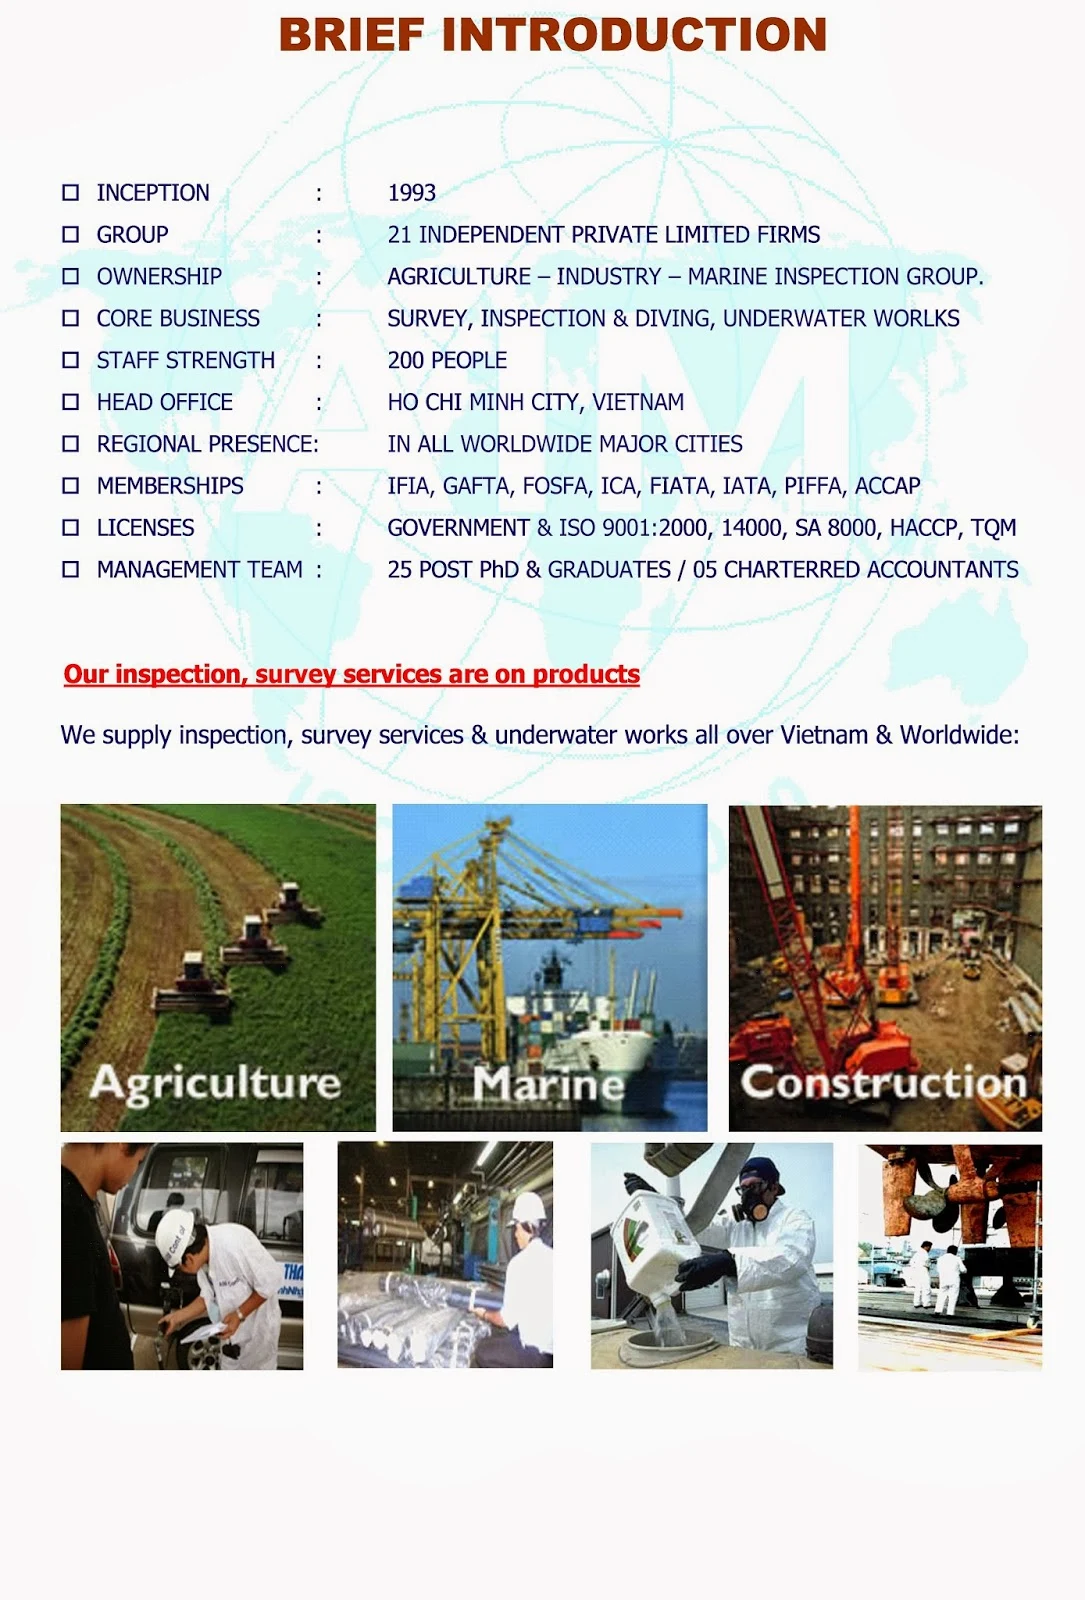      expert quality control inspection and Marine survey consultant services. http://www.aimcontrolgroup.com